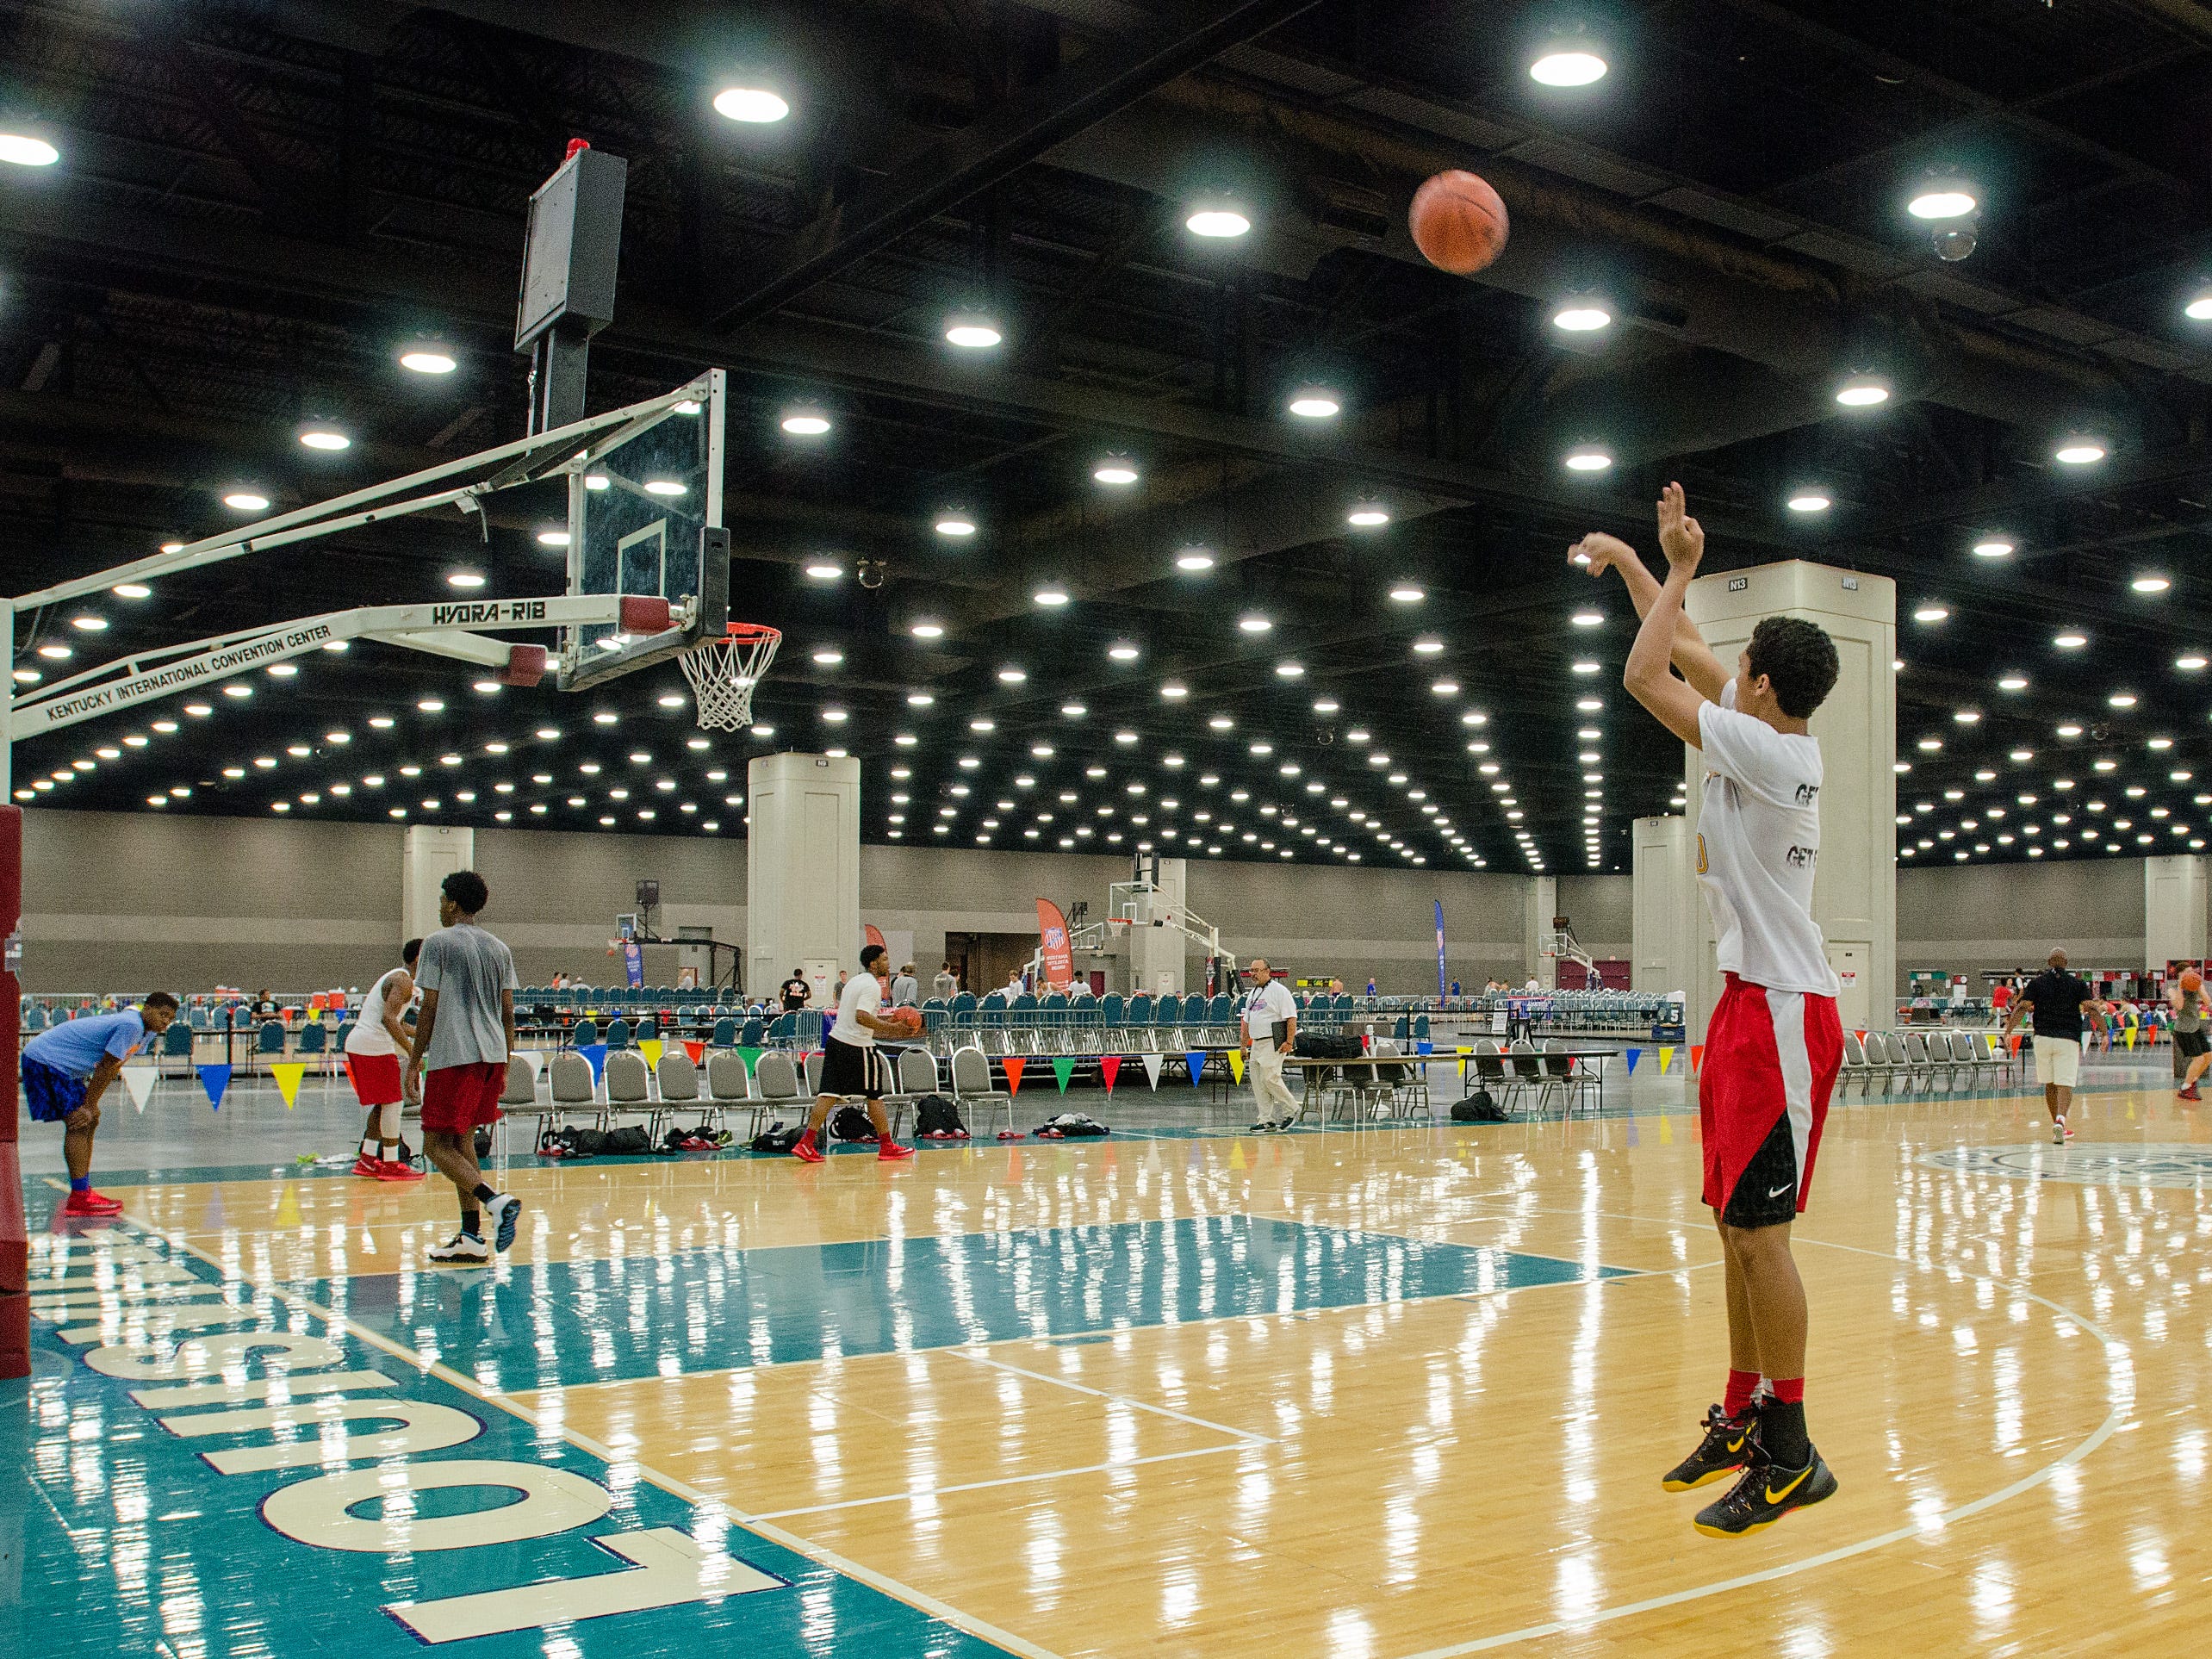 The Arkansas Wings 16-and-under team practices for the Amateur Athletic Union (AAU) Boys Basketball Elite Tournaments in the North Wing of the Kentucky Exposition Center. July 22, 2014